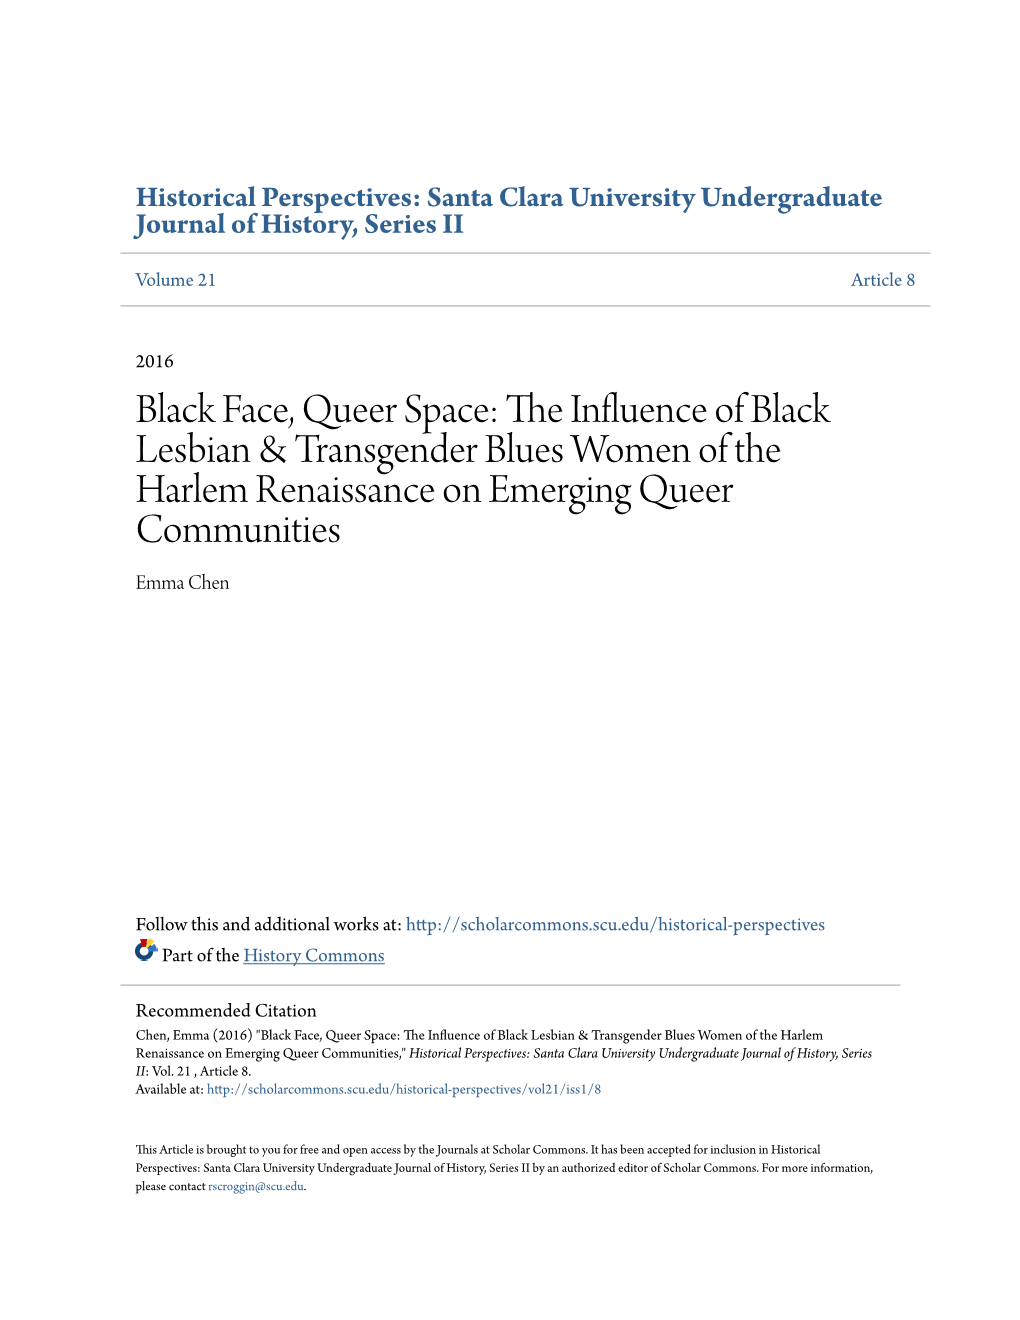 Black Face, Queer Space: the Influence of Black Lesbian & Transgender Blues Women of the Harlem Renaissance on Emerging Queer Communities